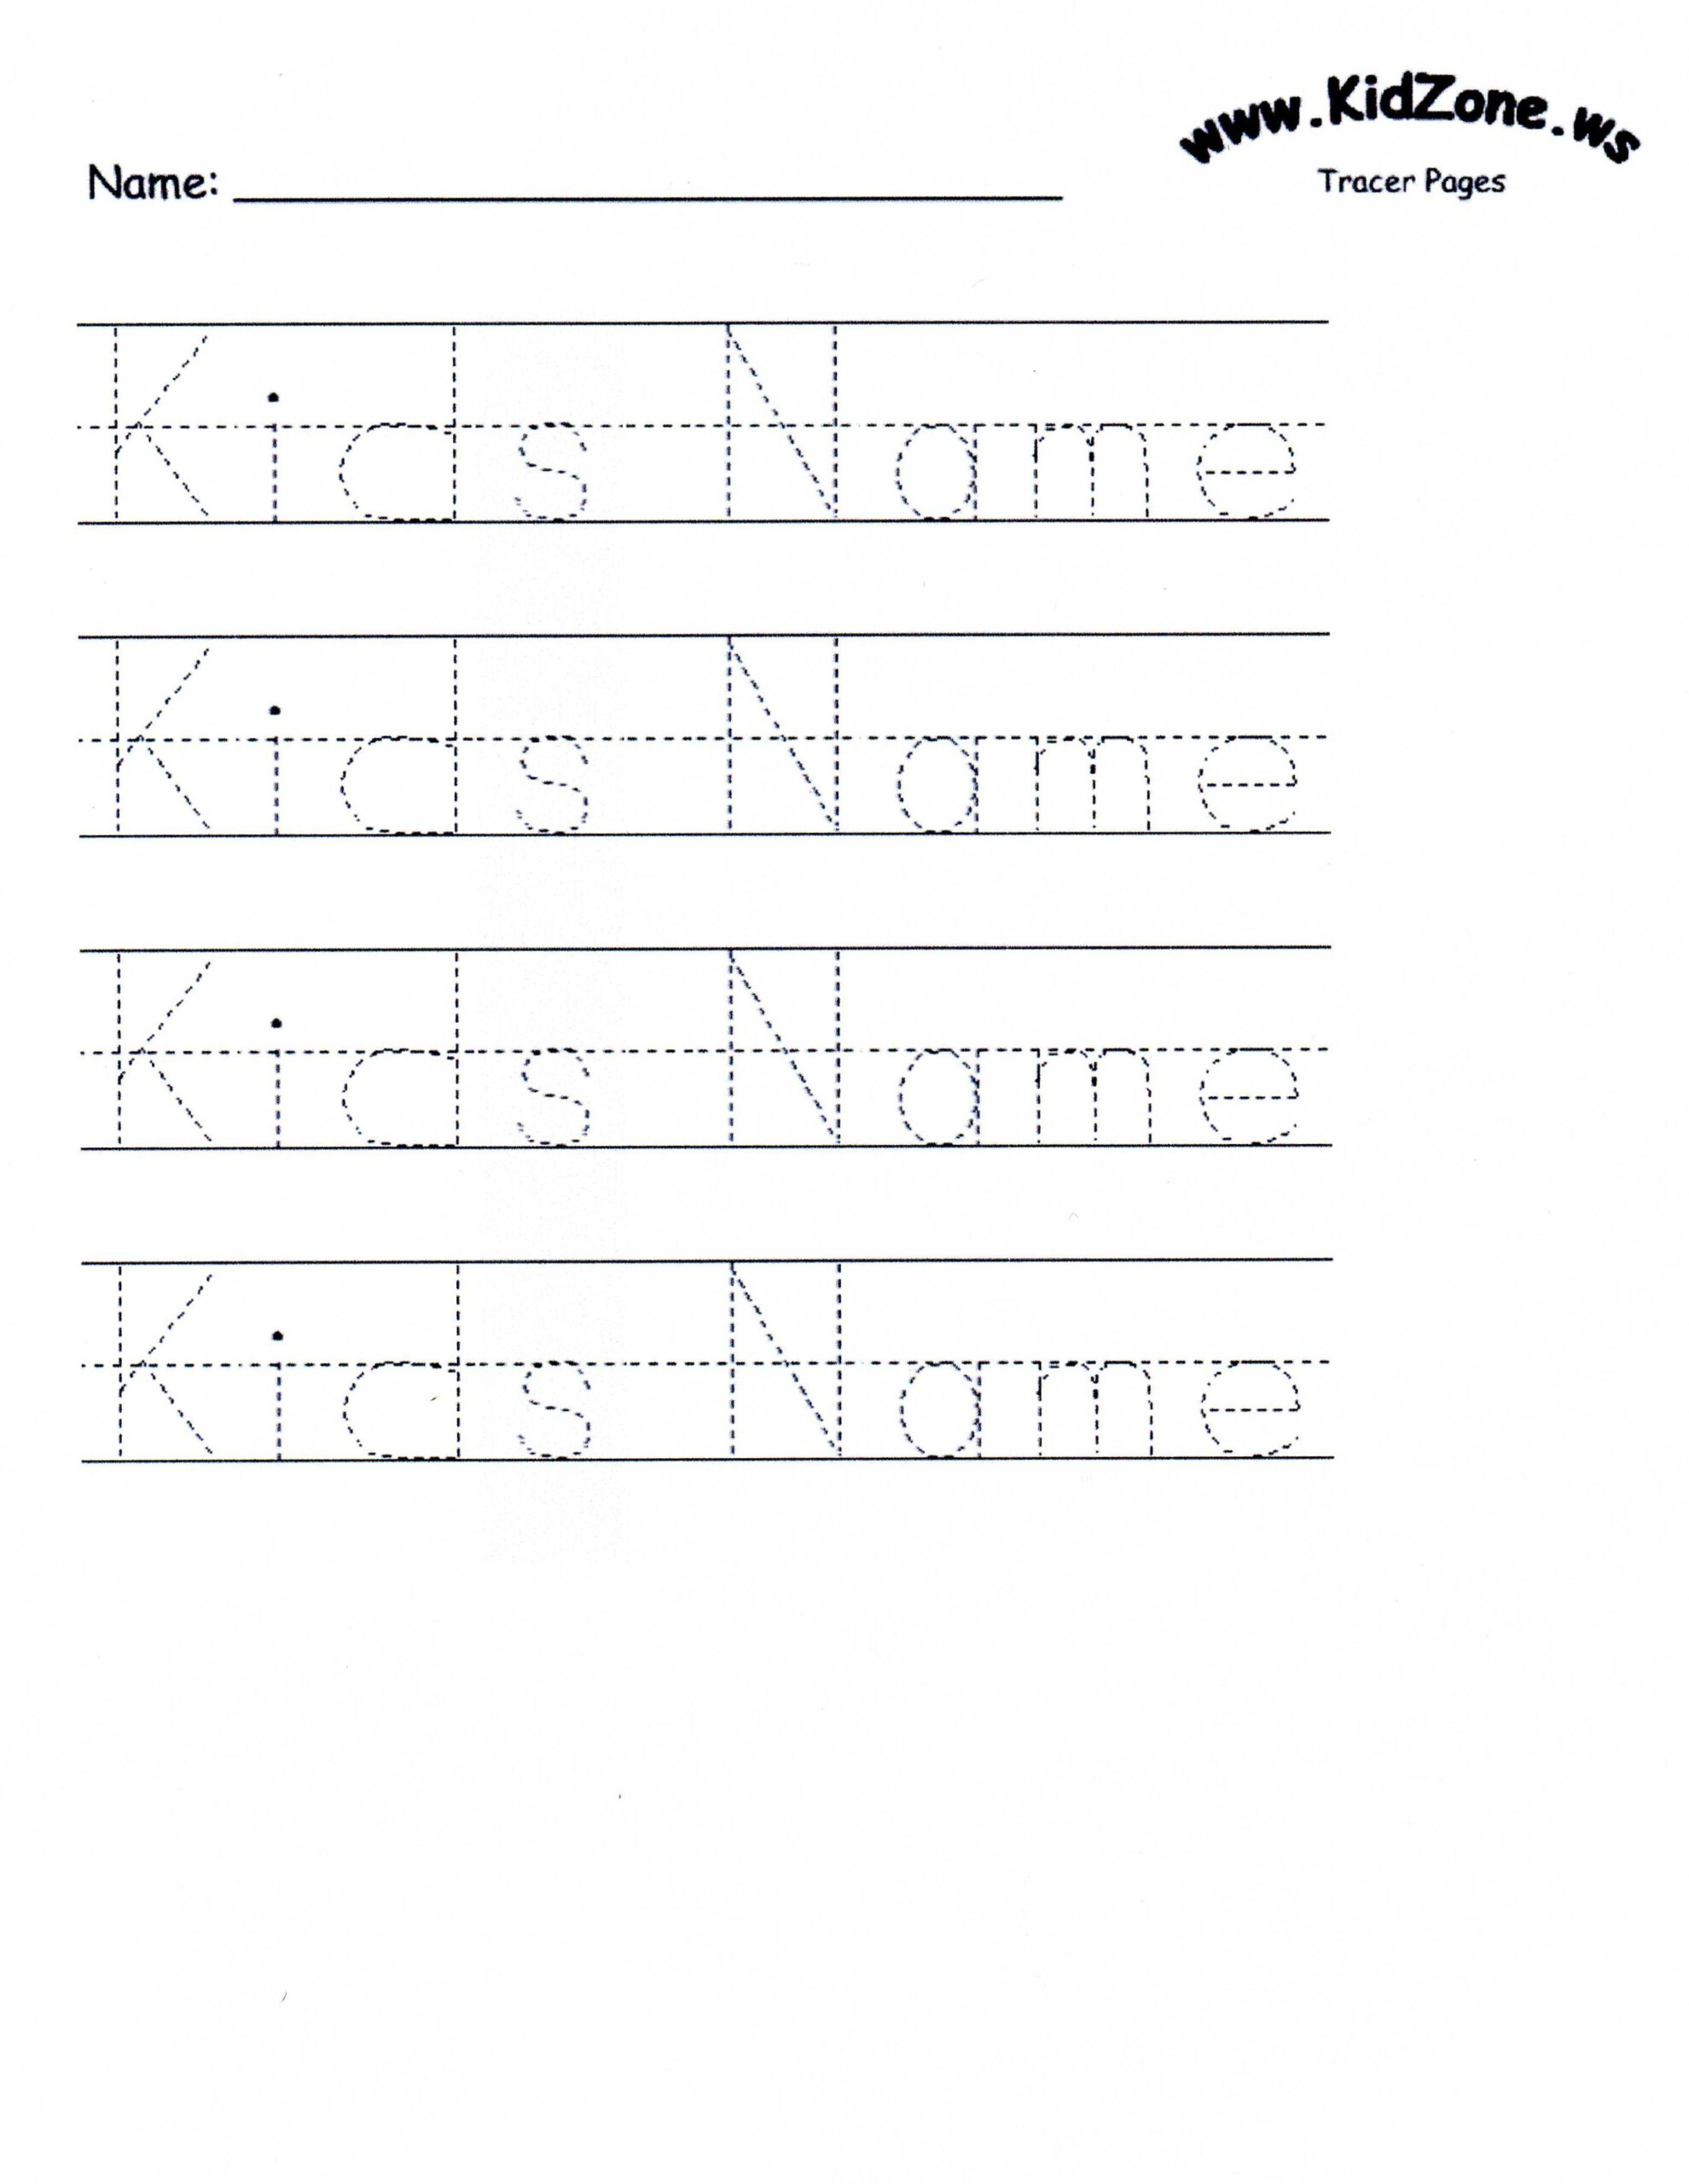 Name Tracing Worksheets To Educations. Name Tracing